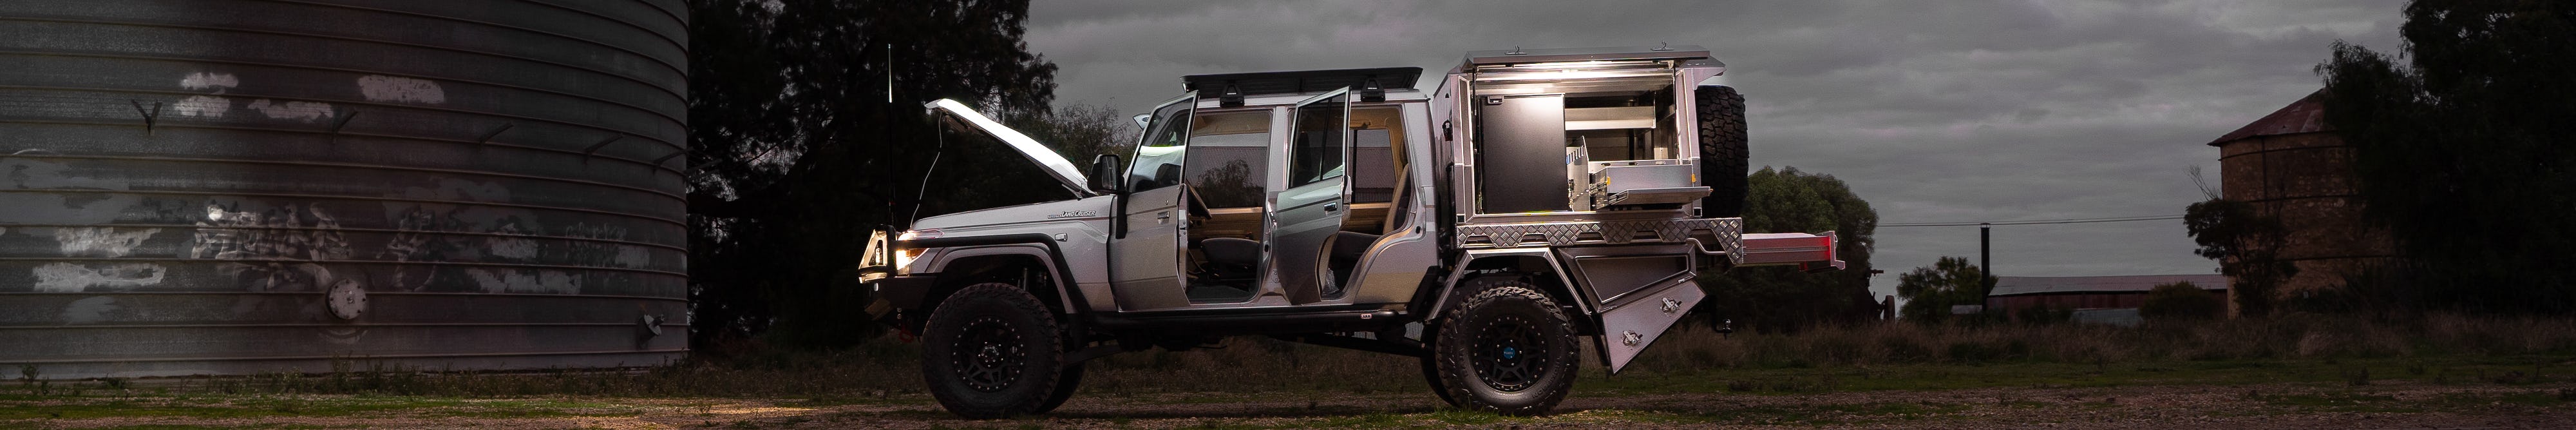 Customised silver 4x4 with doors, canopy & bonnet opened and lights on